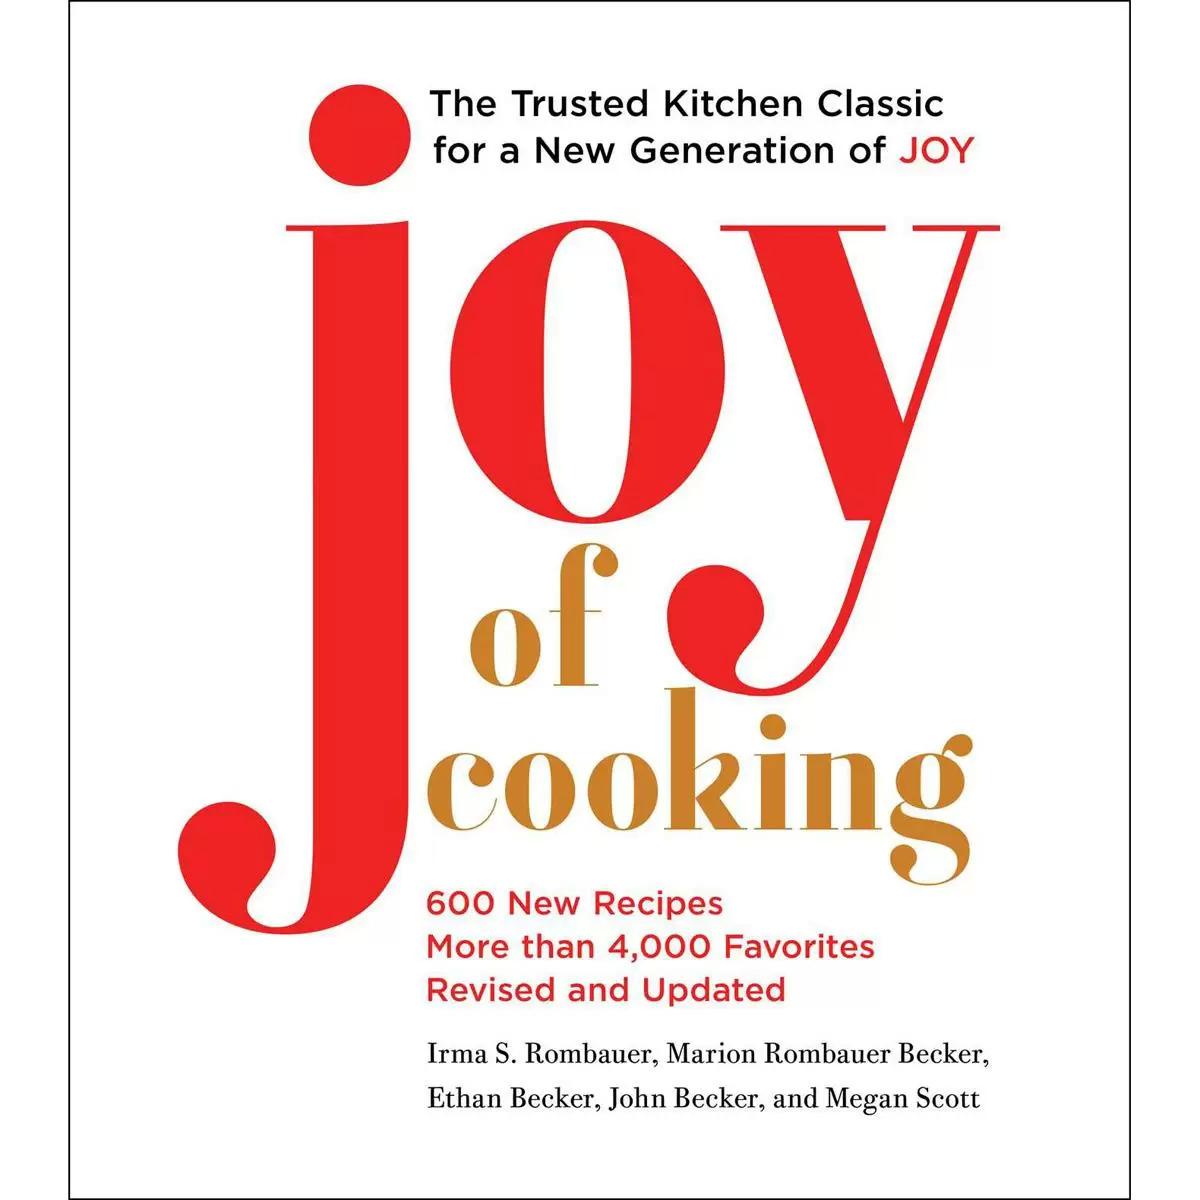 Joy of Cooking 2019 Edition eBook for $2.99